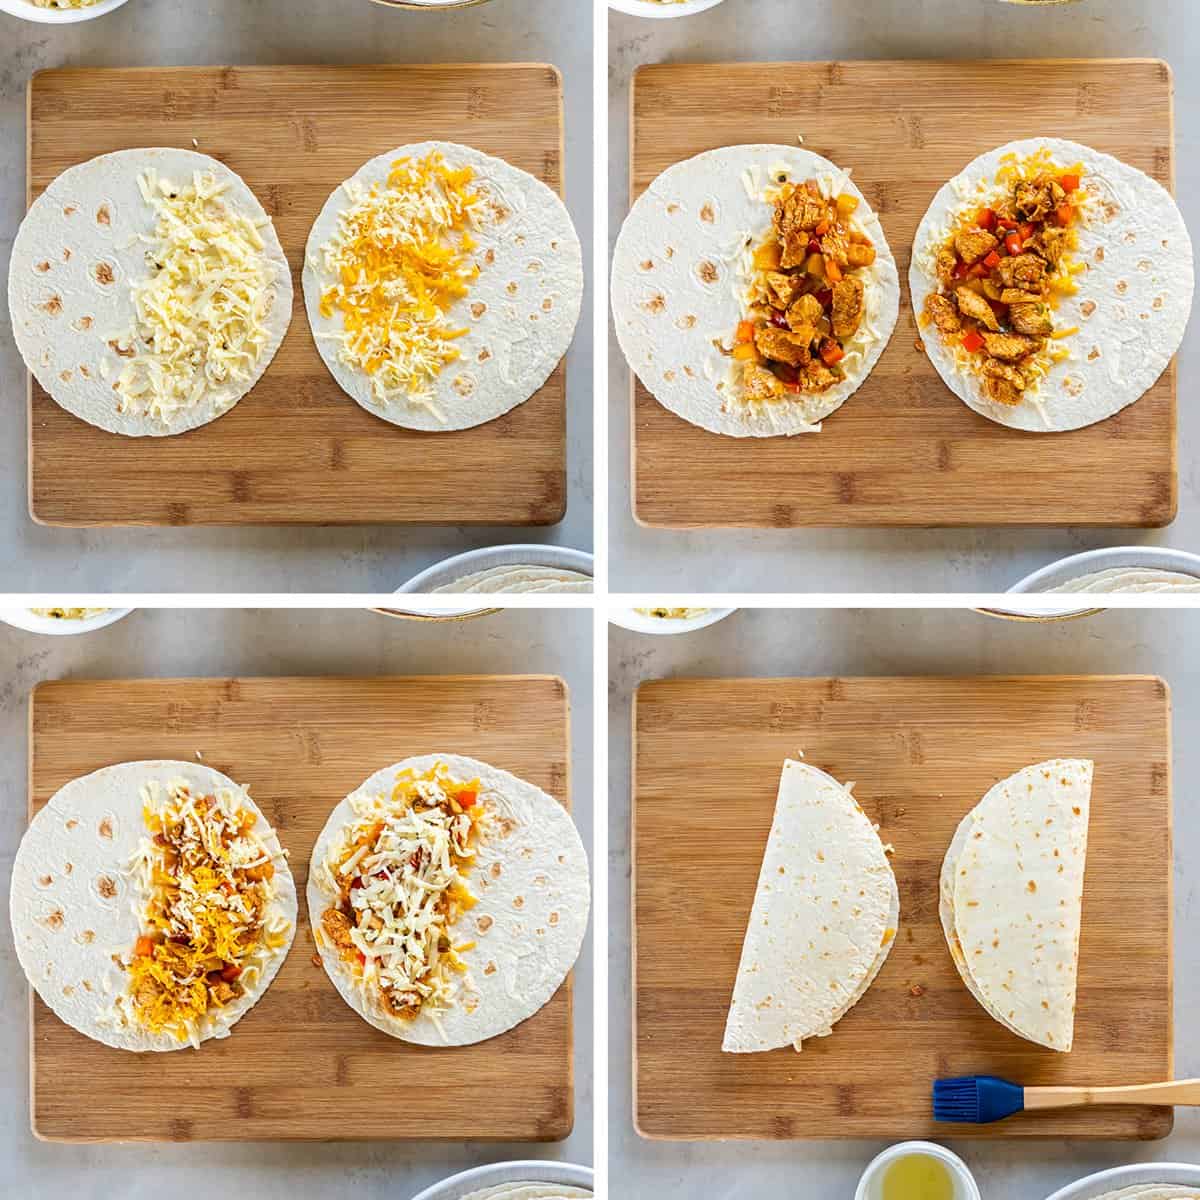 Four images showing how to assemble fajitas with tortillas, chicken, peppers and onions, and cheese.